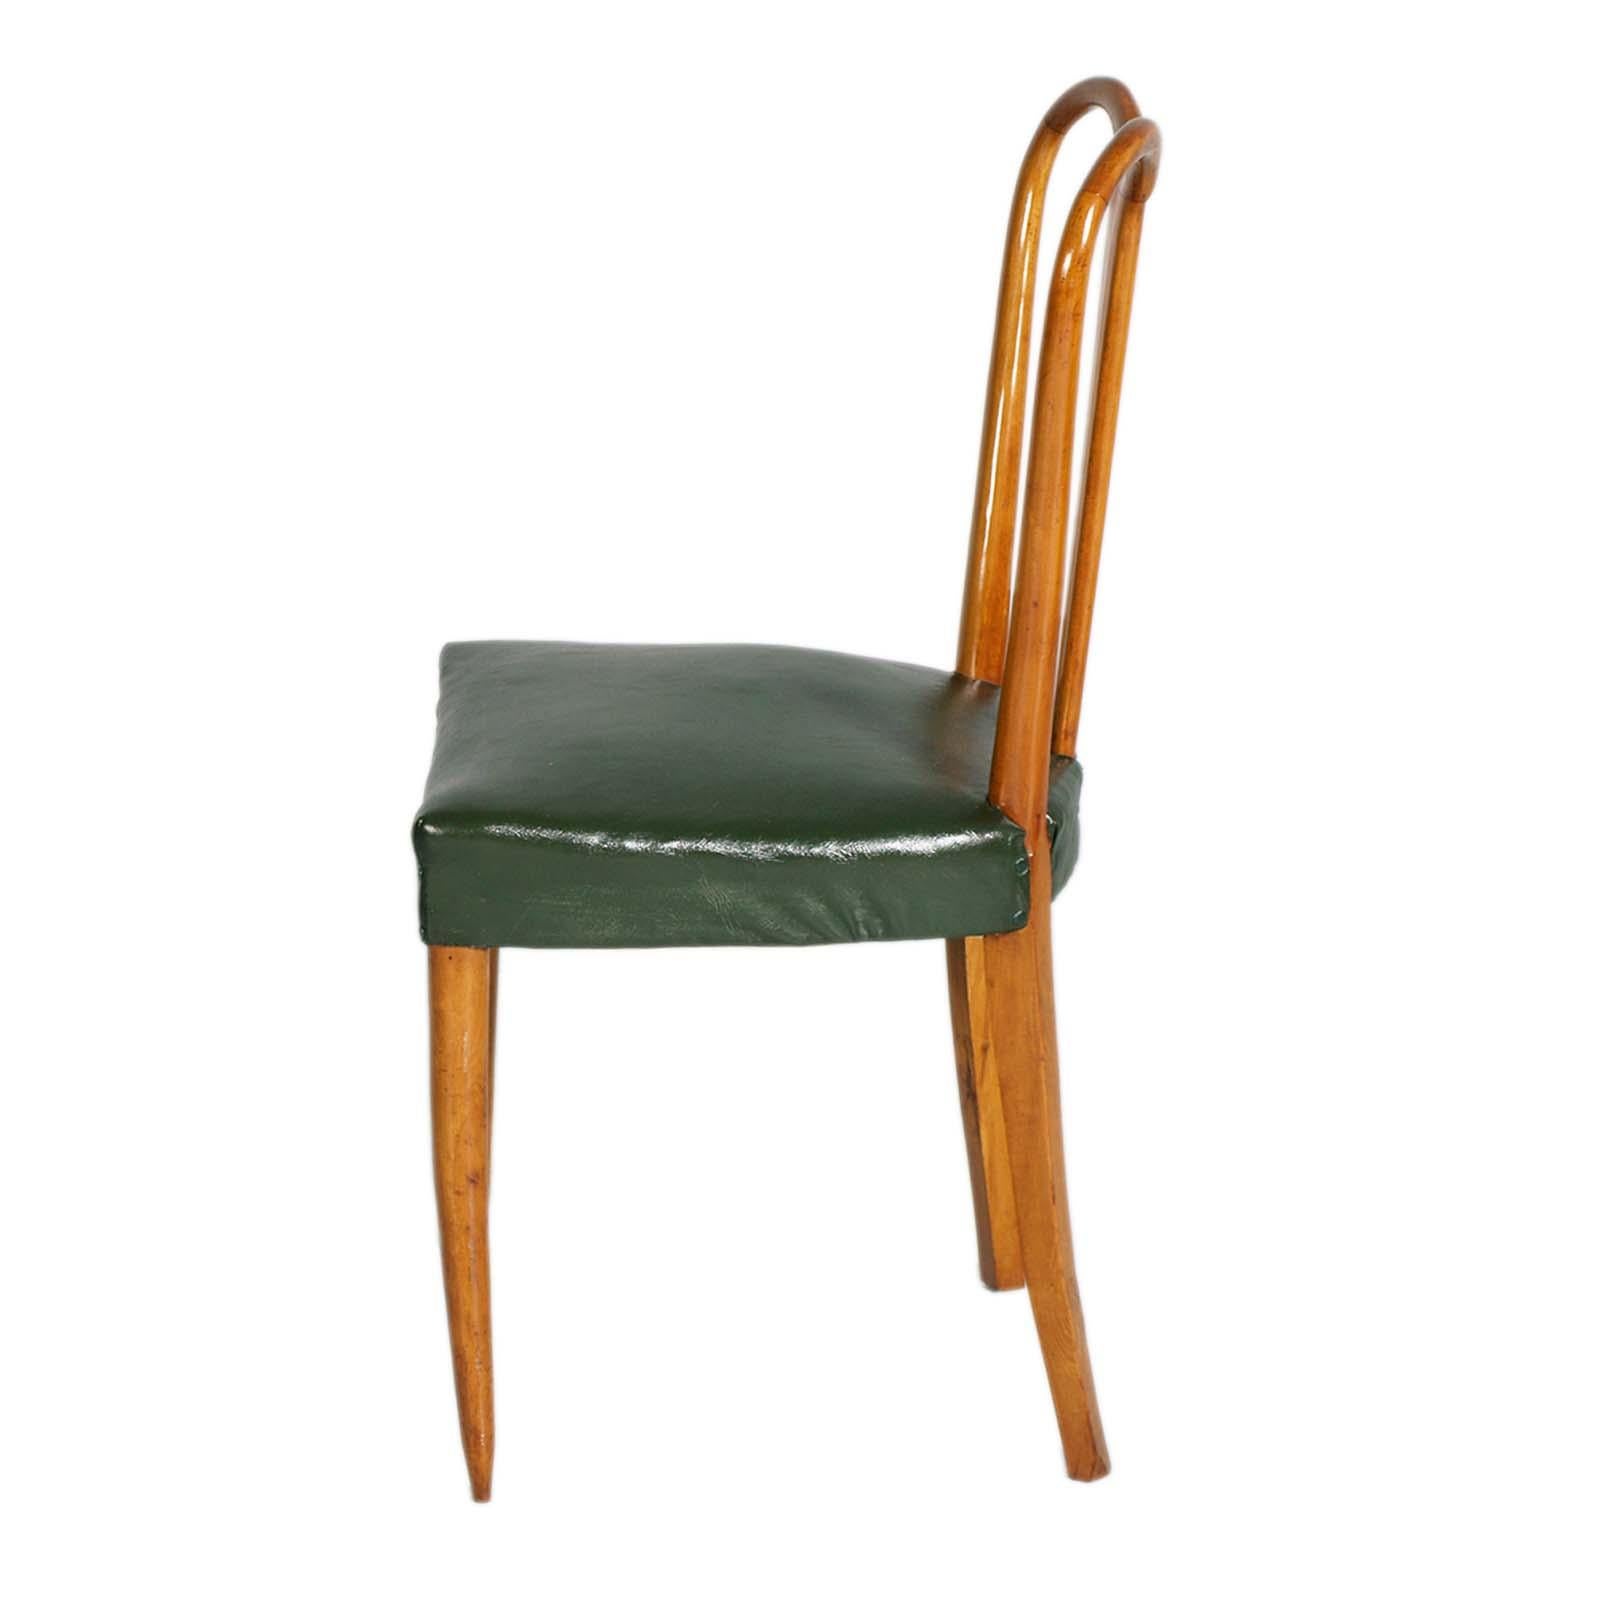 Mid-Century Modern Mid-Century Chairs by Ico Parisi for Fratelli Rizzi, Springs Seat & Leatherette